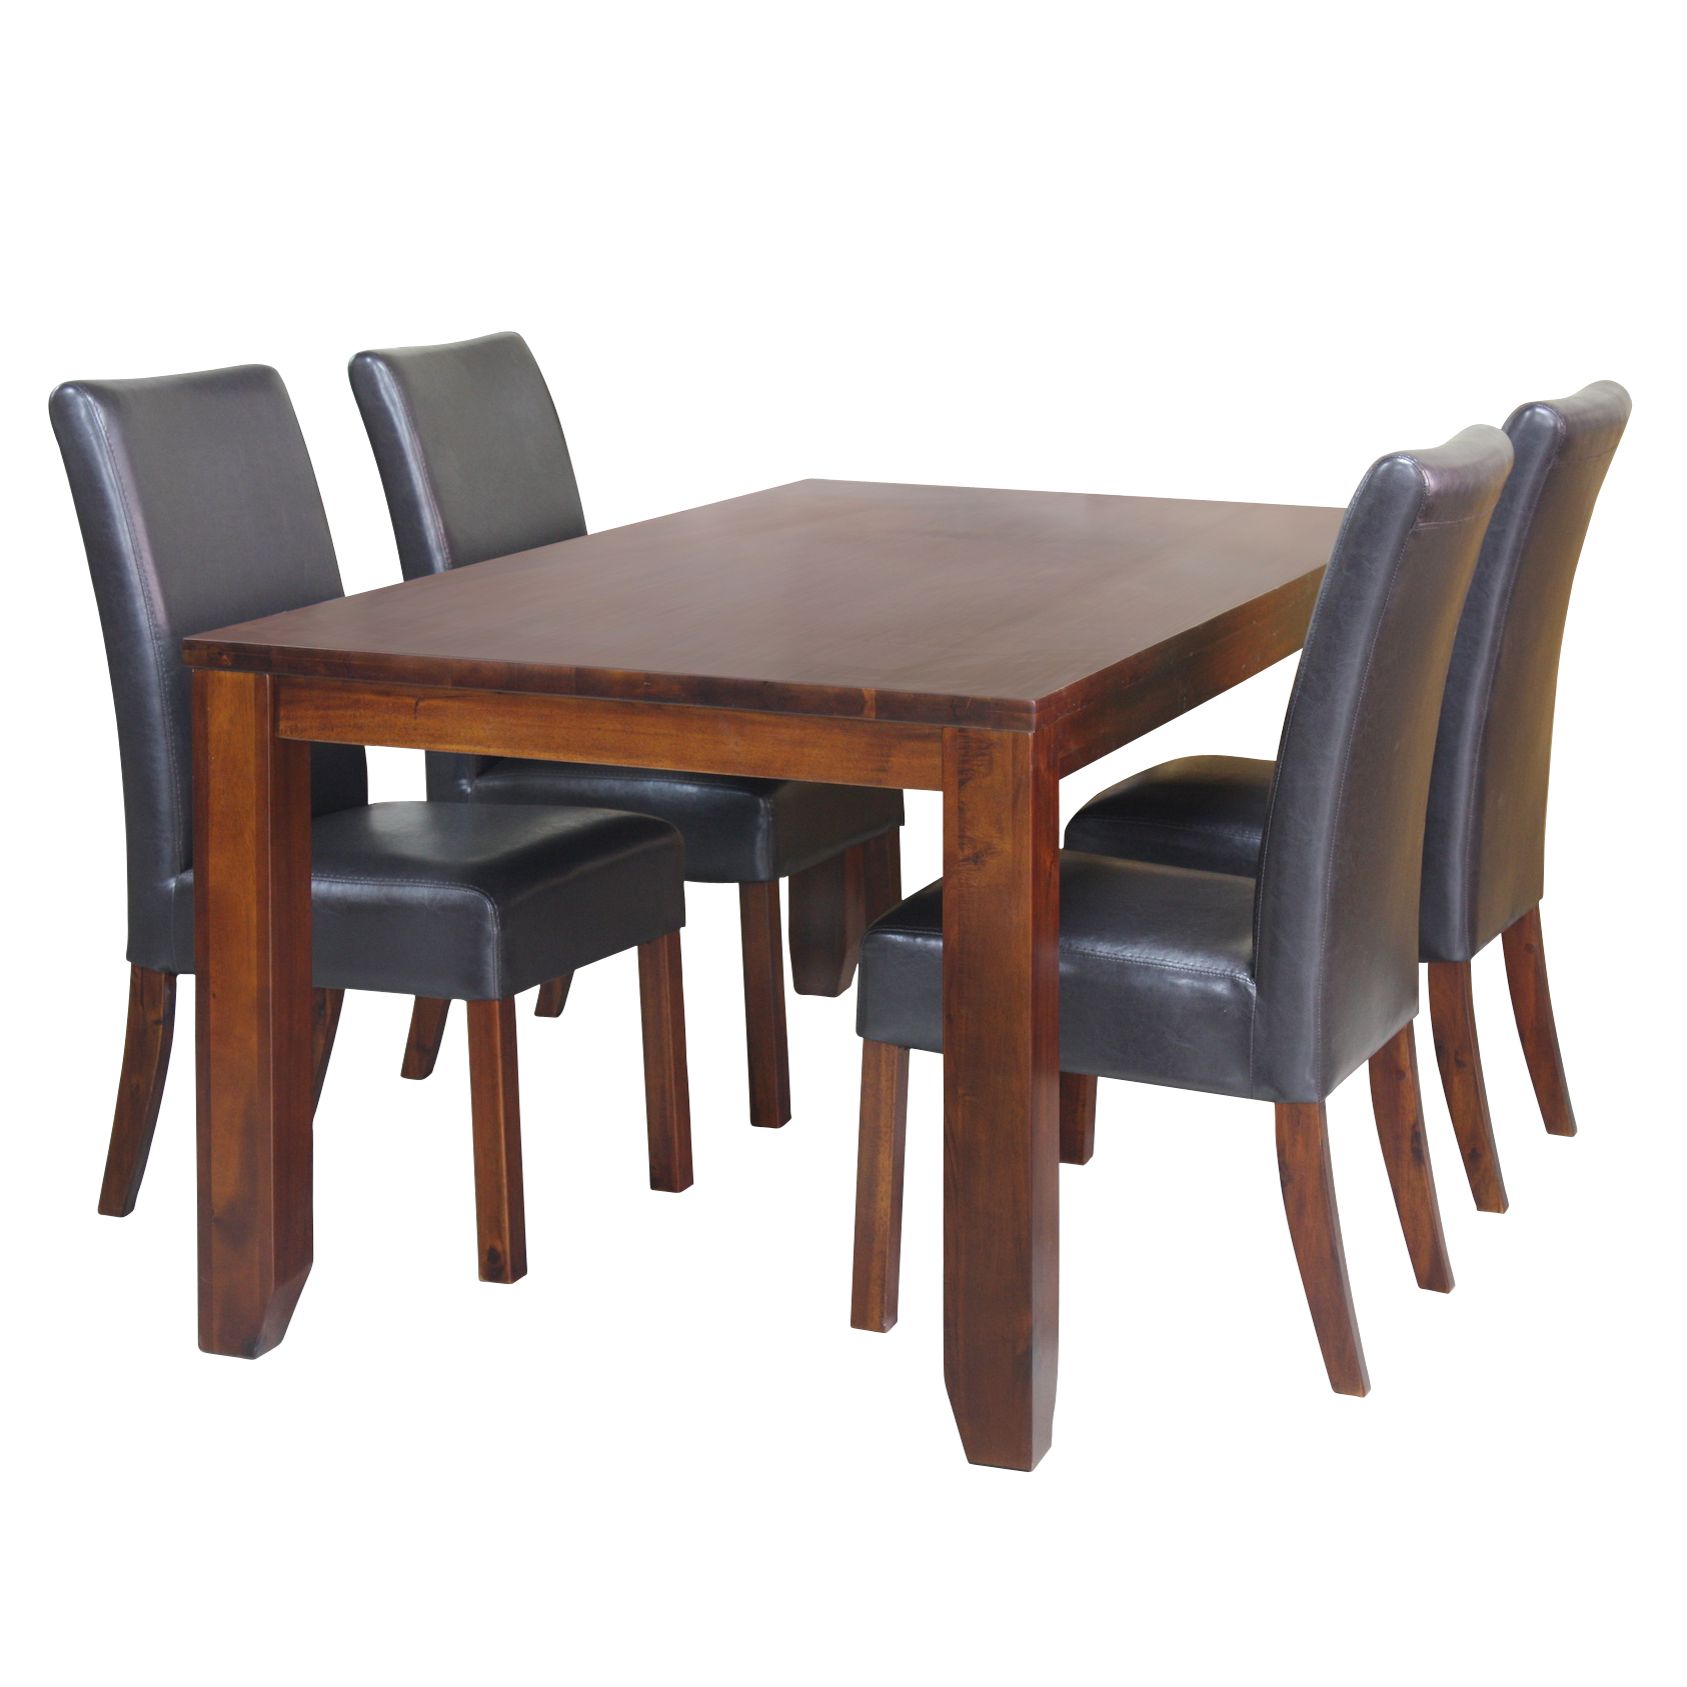 John Lewis Henley Dining Table and 4 Chairs